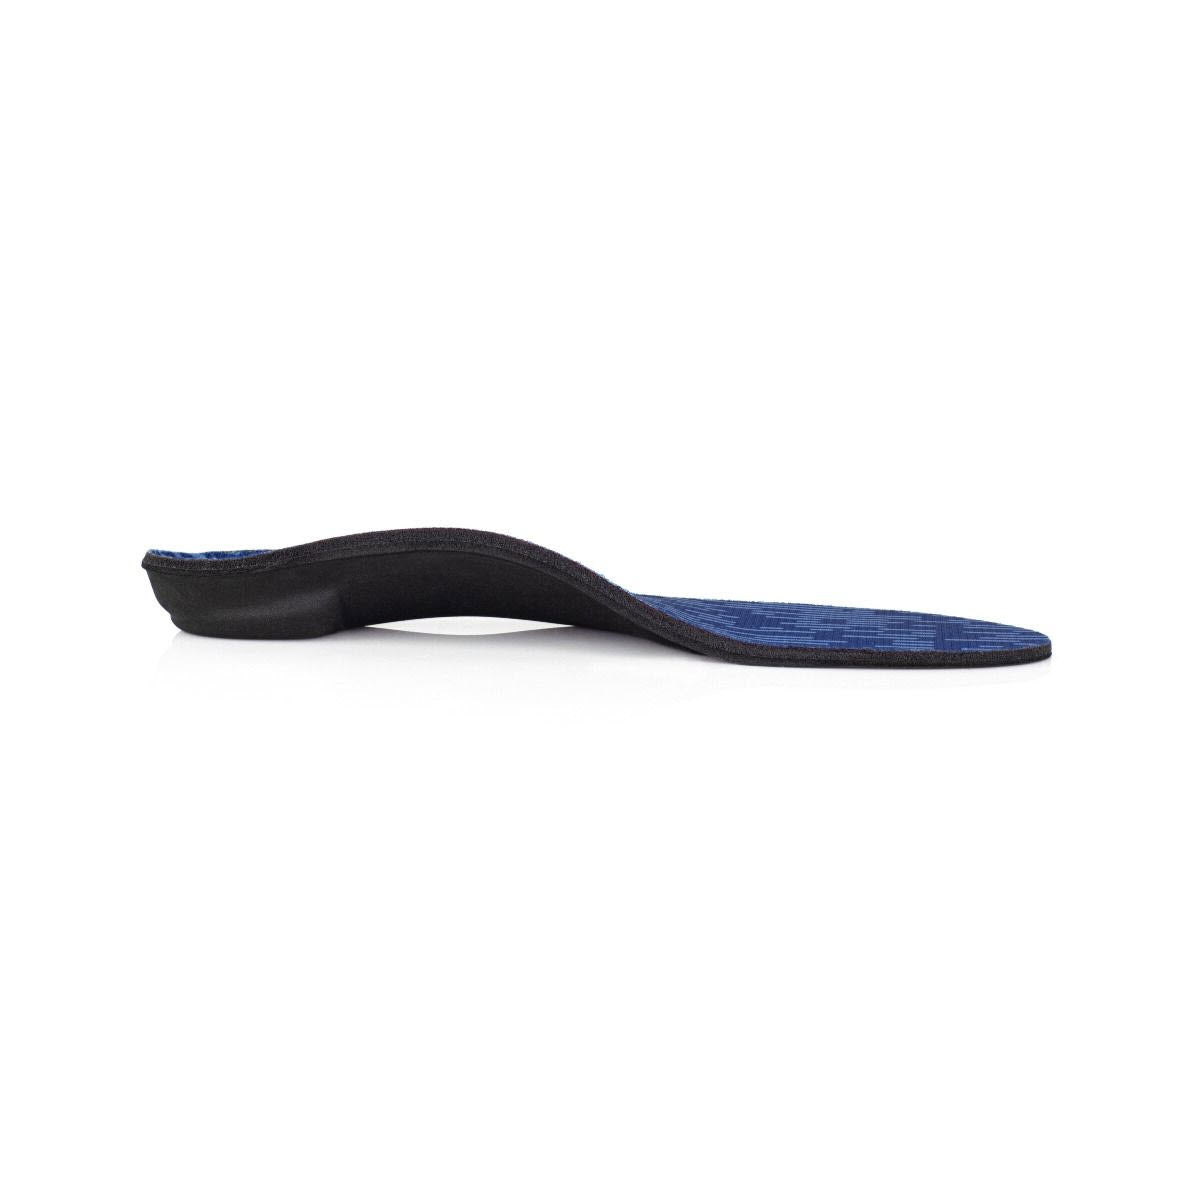 Powerstep PINNACLE MAXX SUPPORT REPLACEMENT INSOLE on a white background.